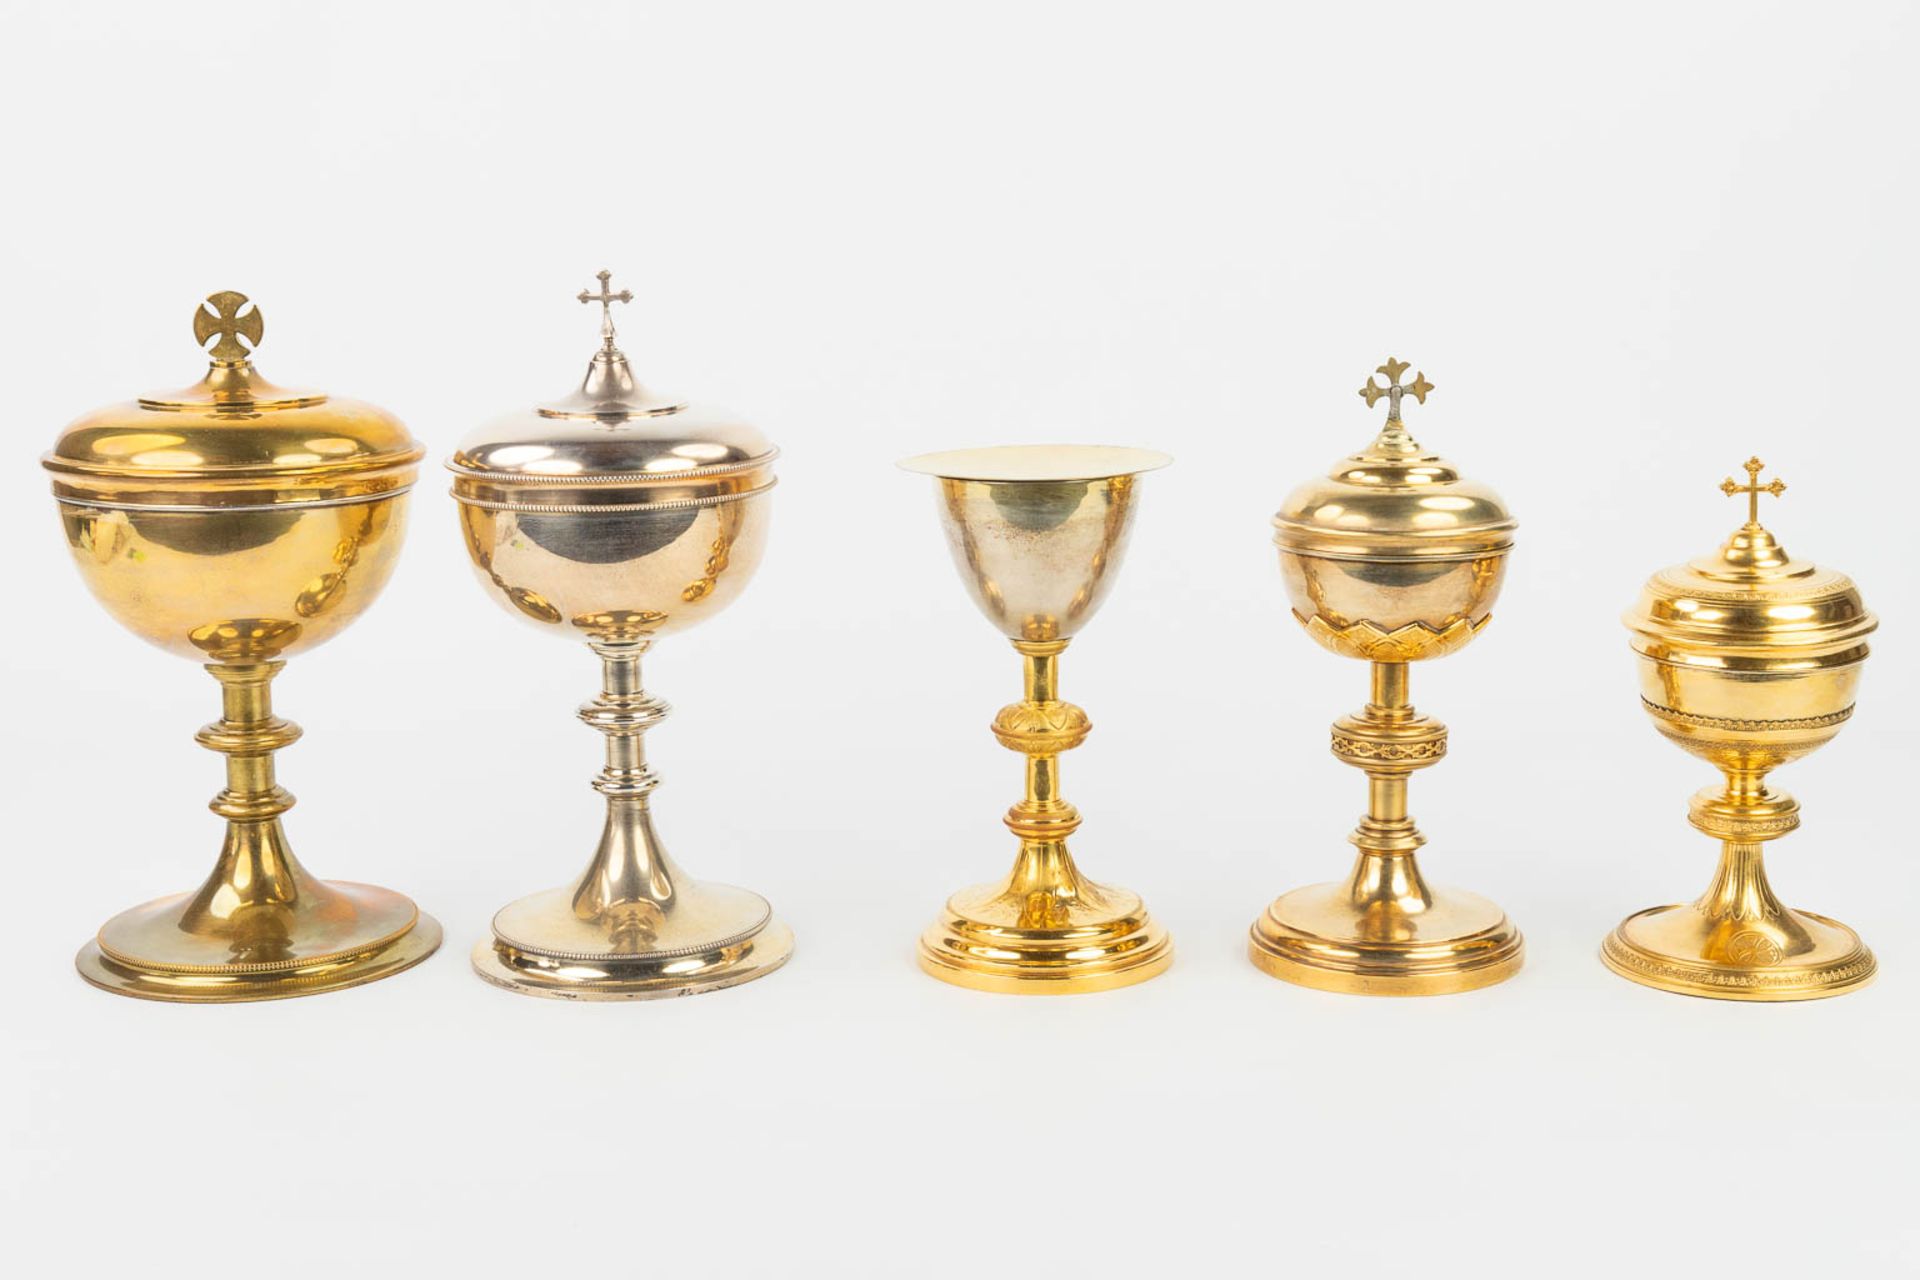 A collection of 4 large ciboria and a chalice made of silver and gold plated metal. - Image 6 of 24